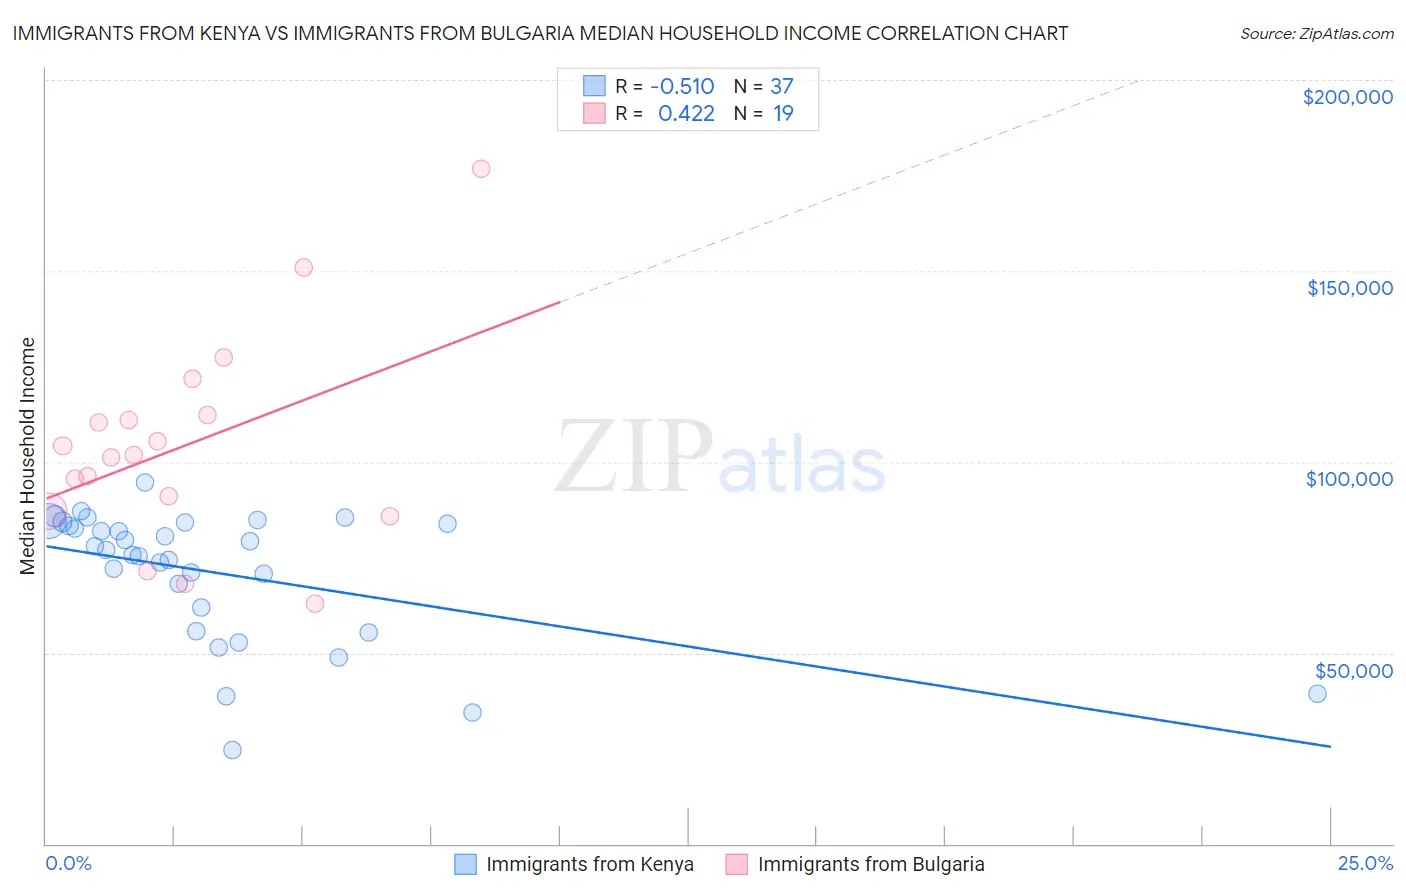 Immigrants from Kenya vs Immigrants from Bulgaria Median Household Income